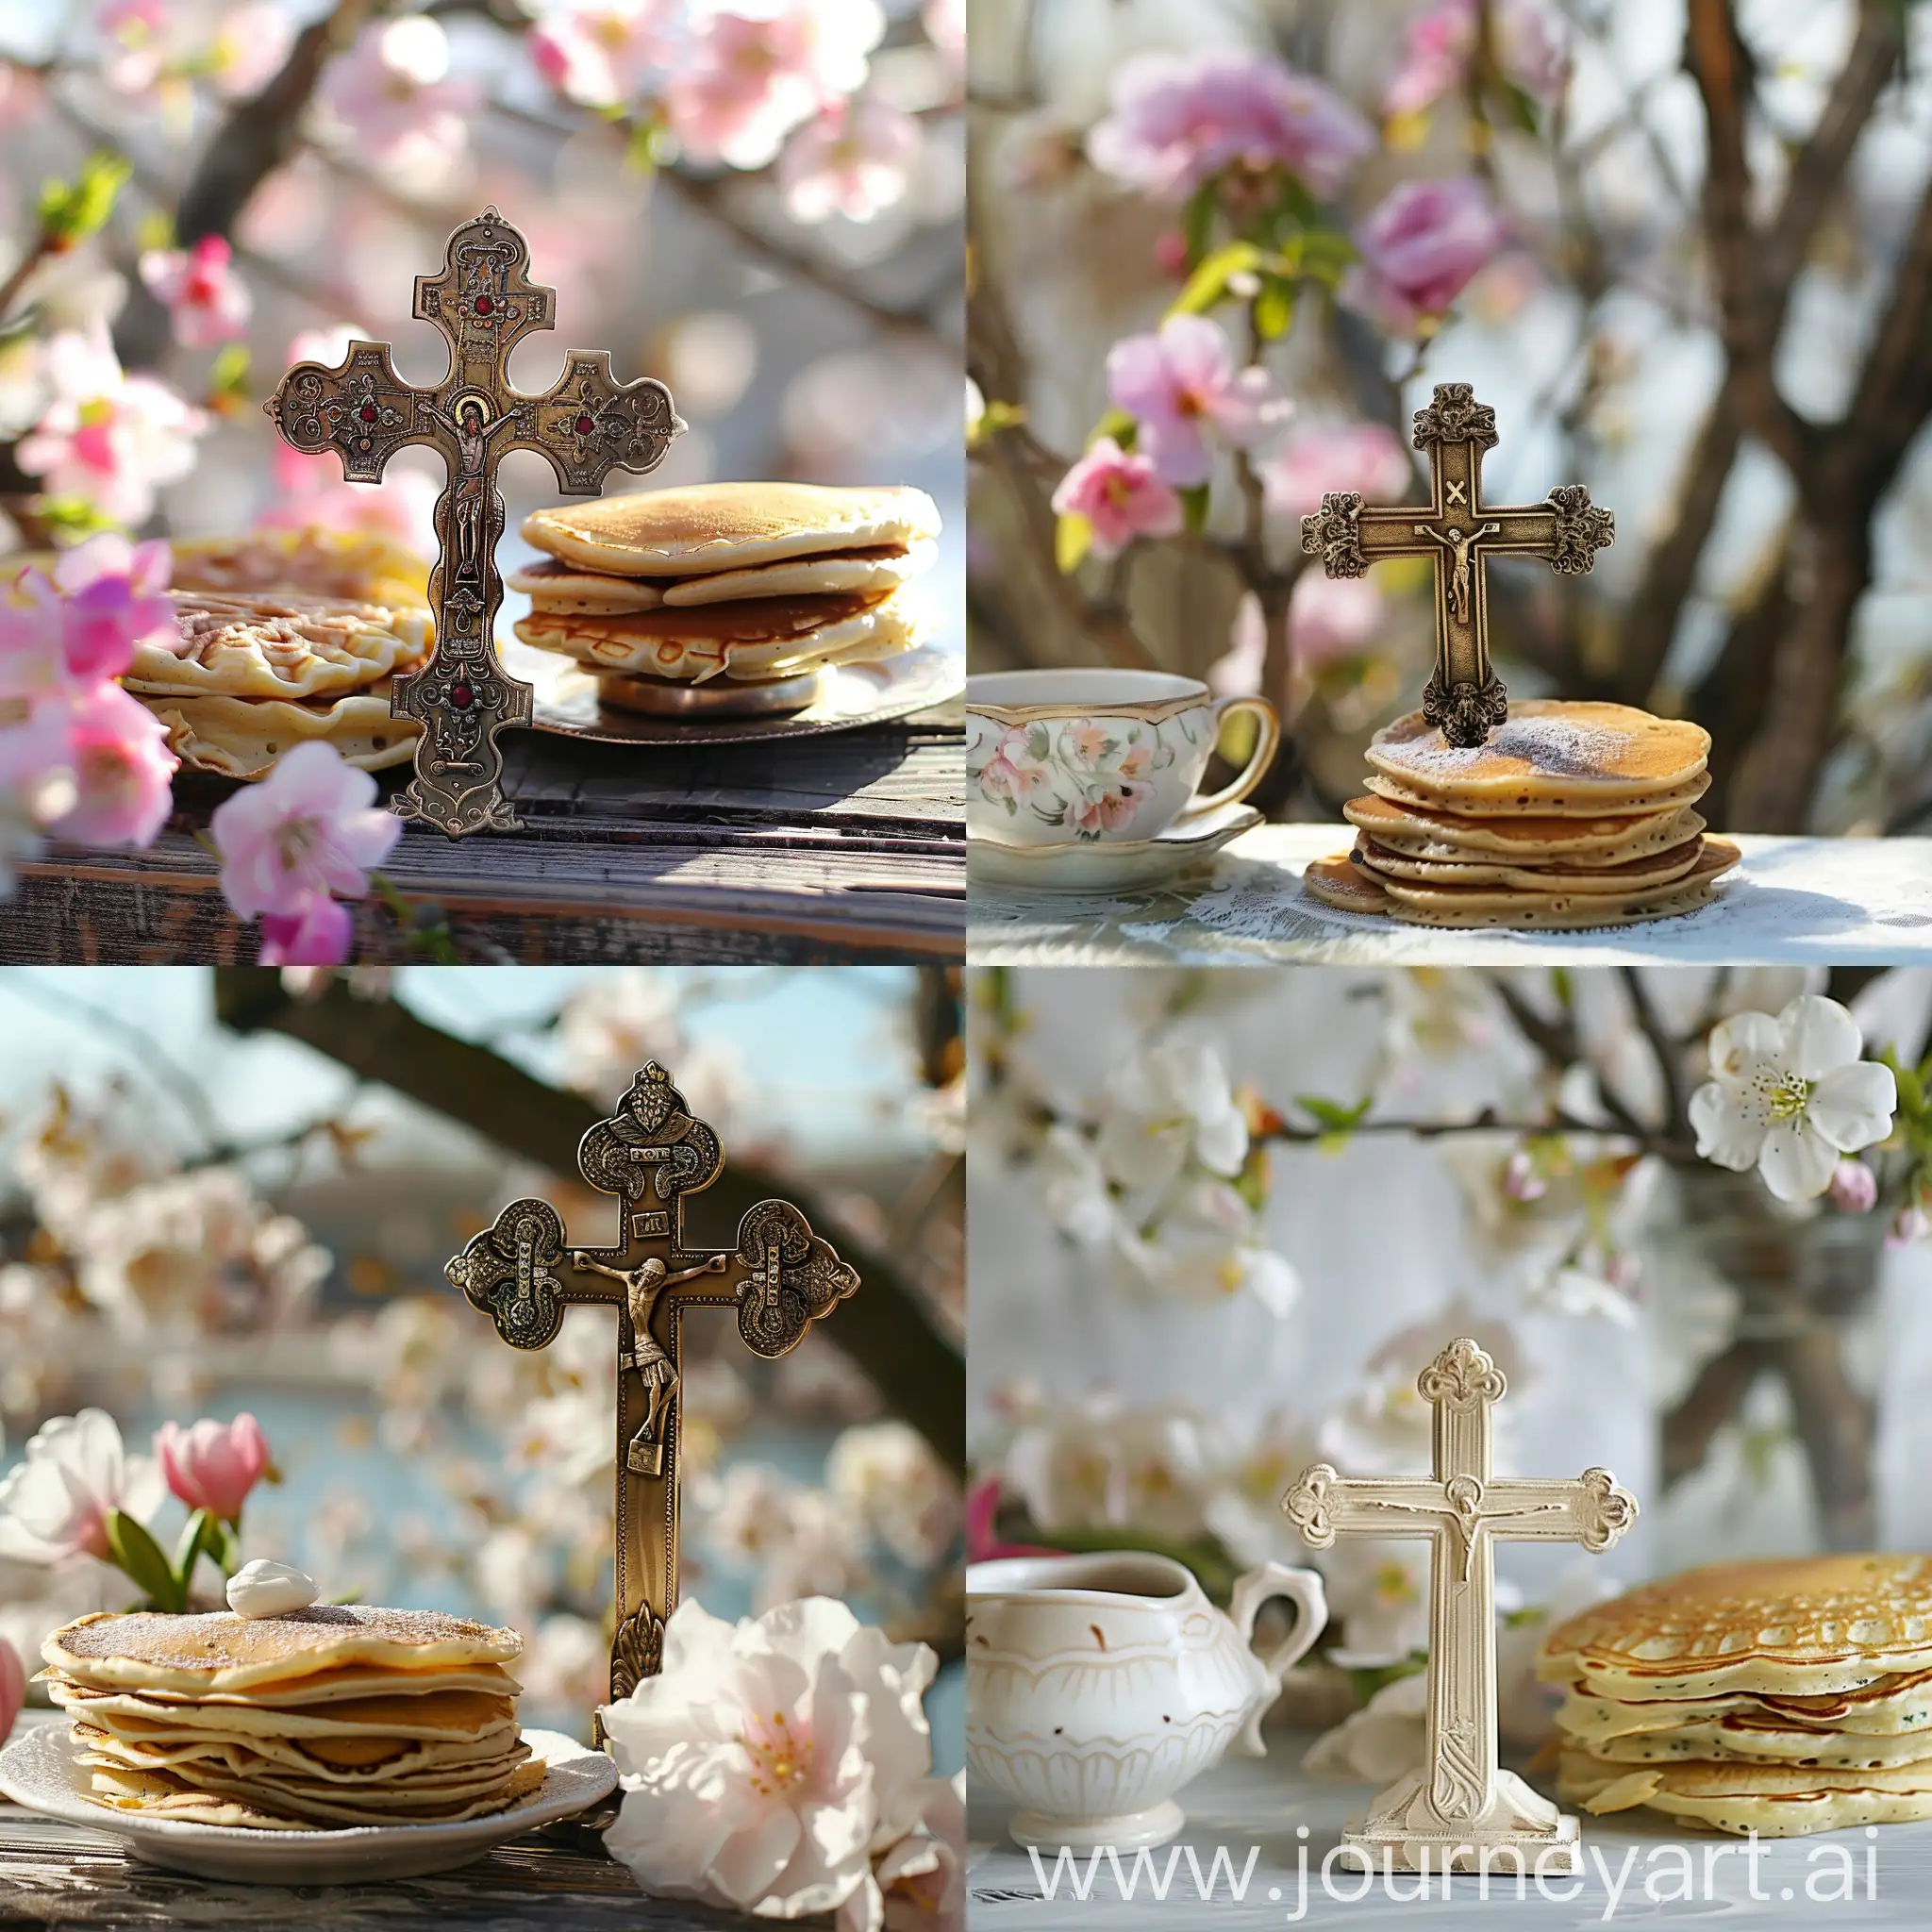 an orthodox cross without Jesus, is near russian pancakes, on the table, with early spring background